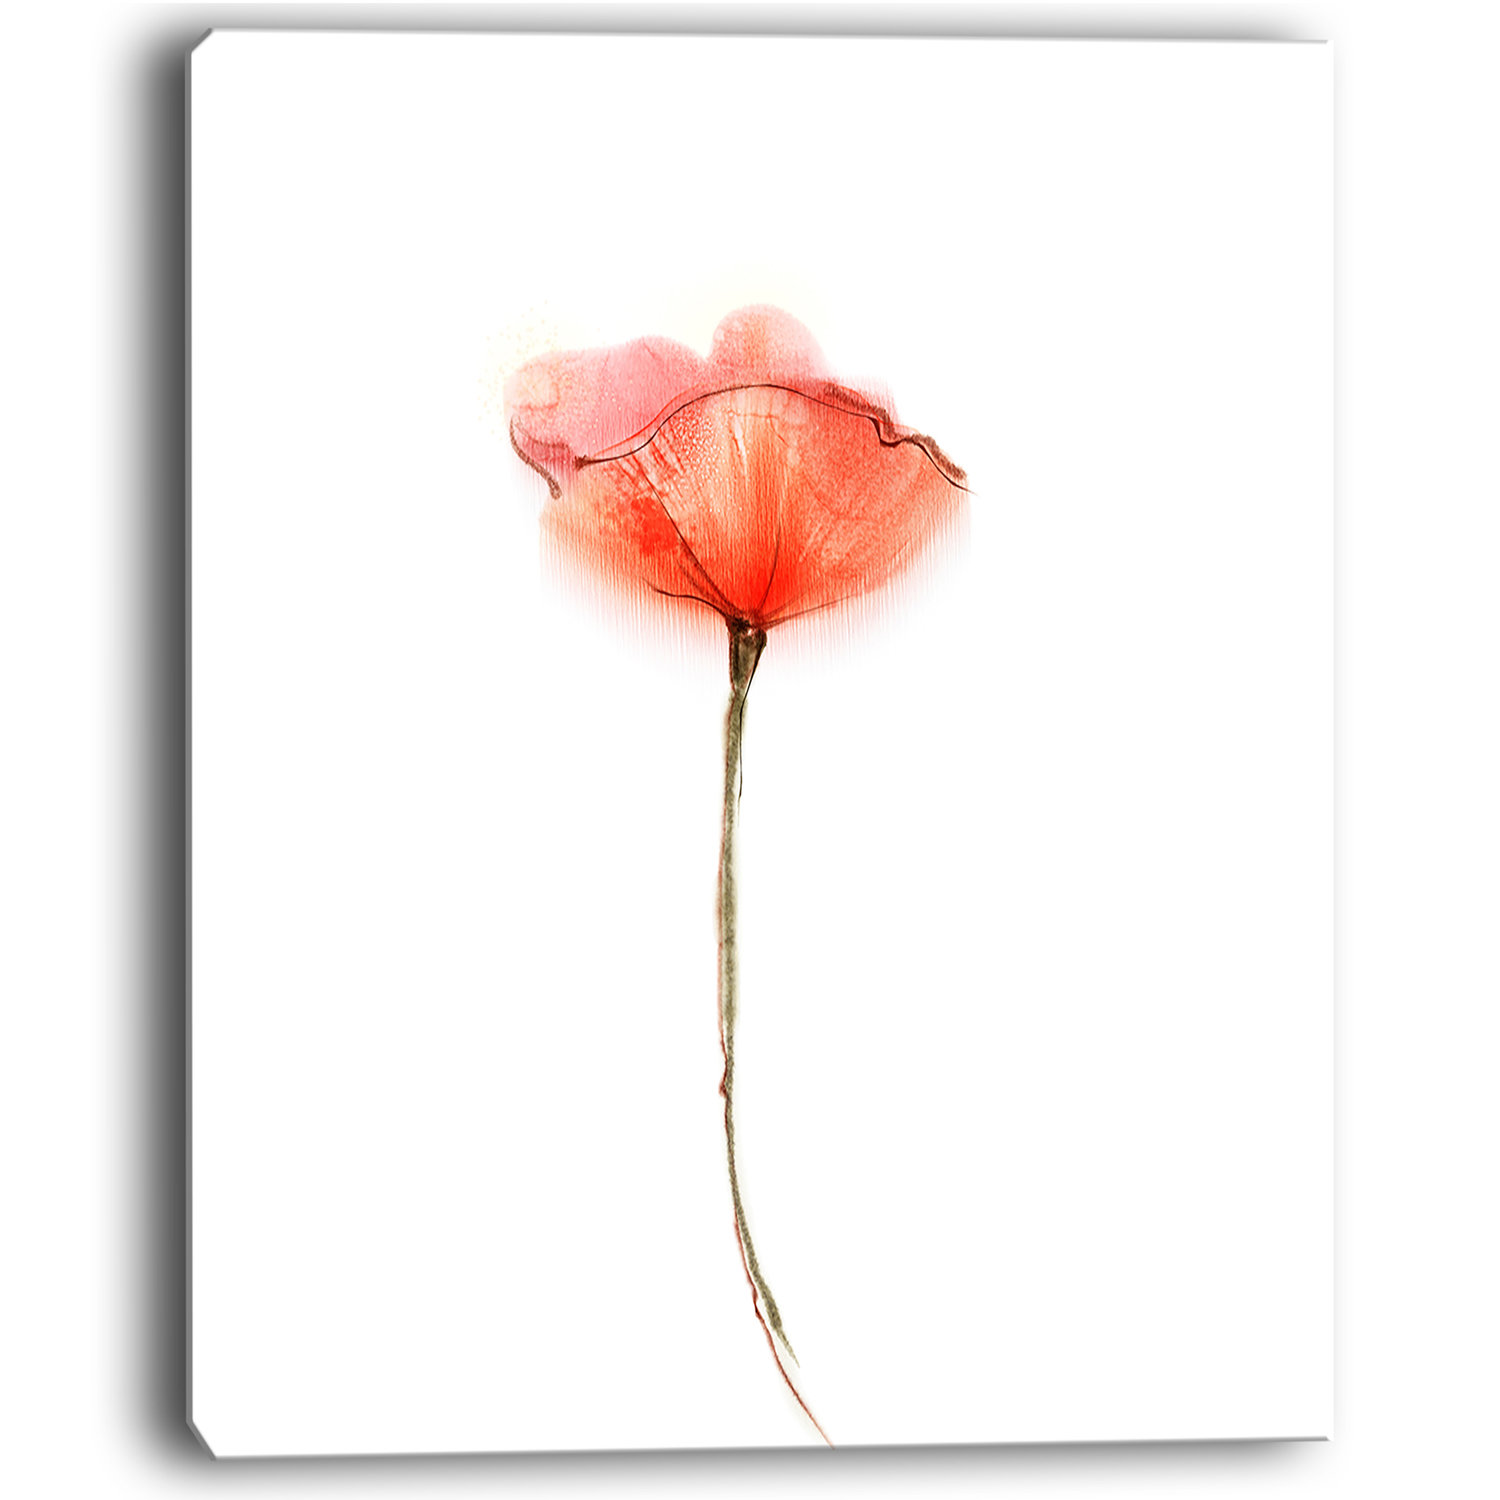 DesignArt Watercolor Large Red Poppy Flower Painting Print on ...